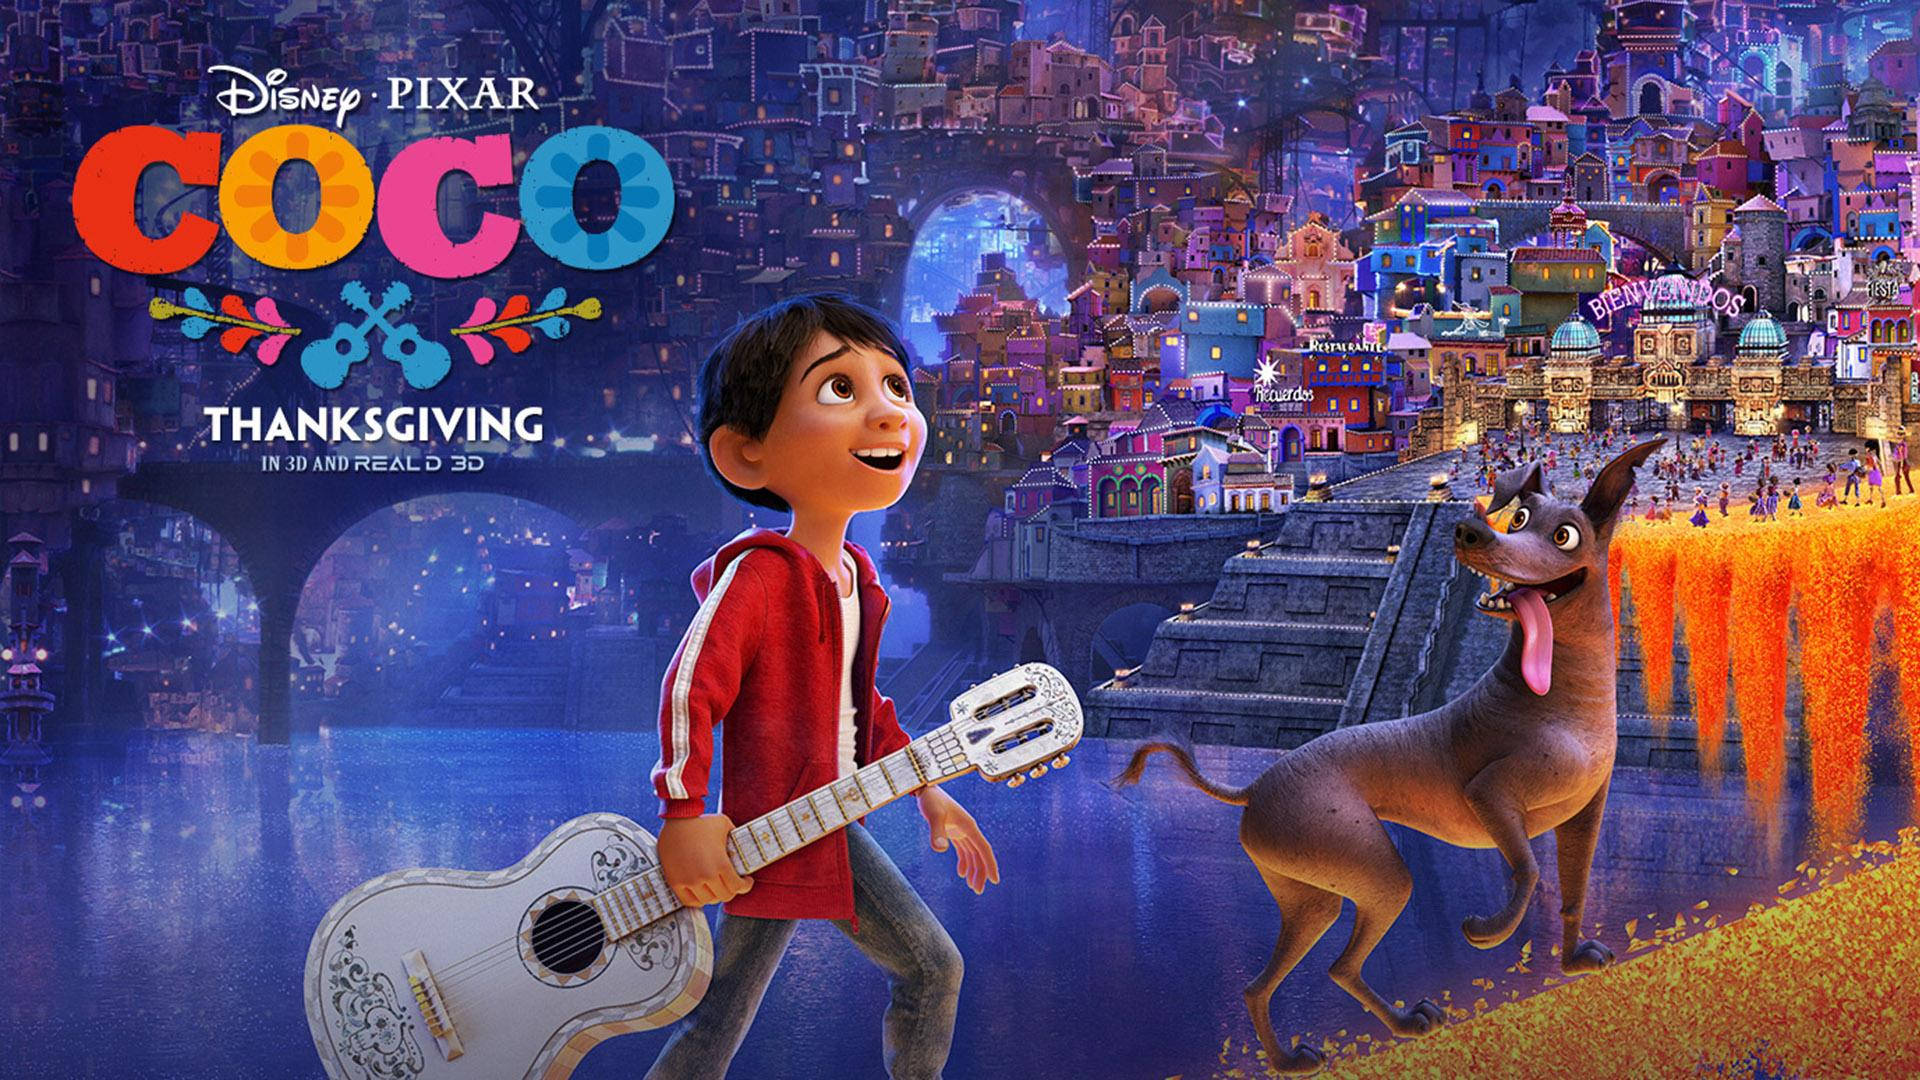 3d Coco Movie Poster Background